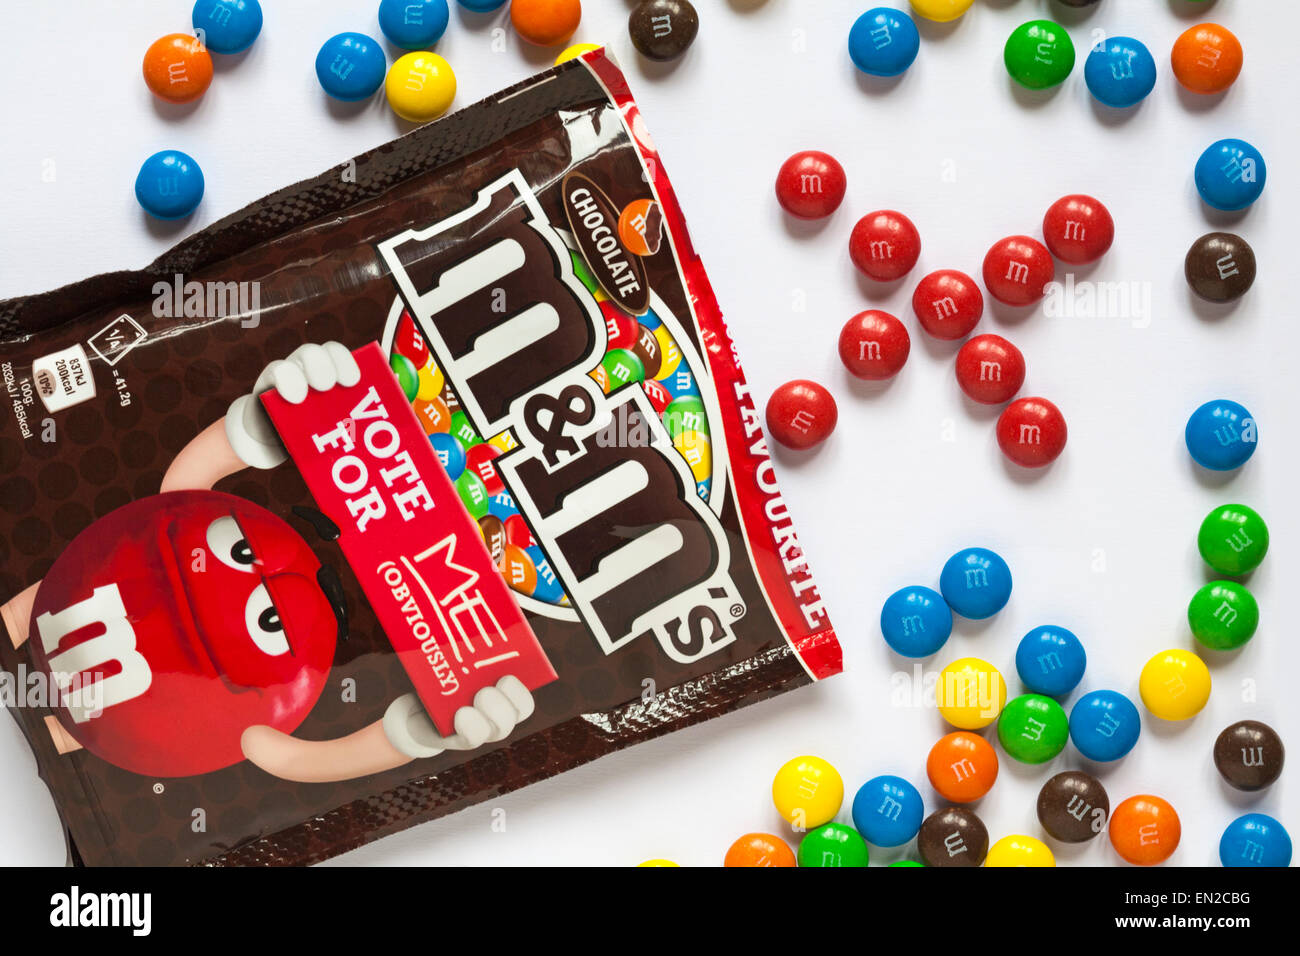 Red M&M's - Chocolates & Sweets 